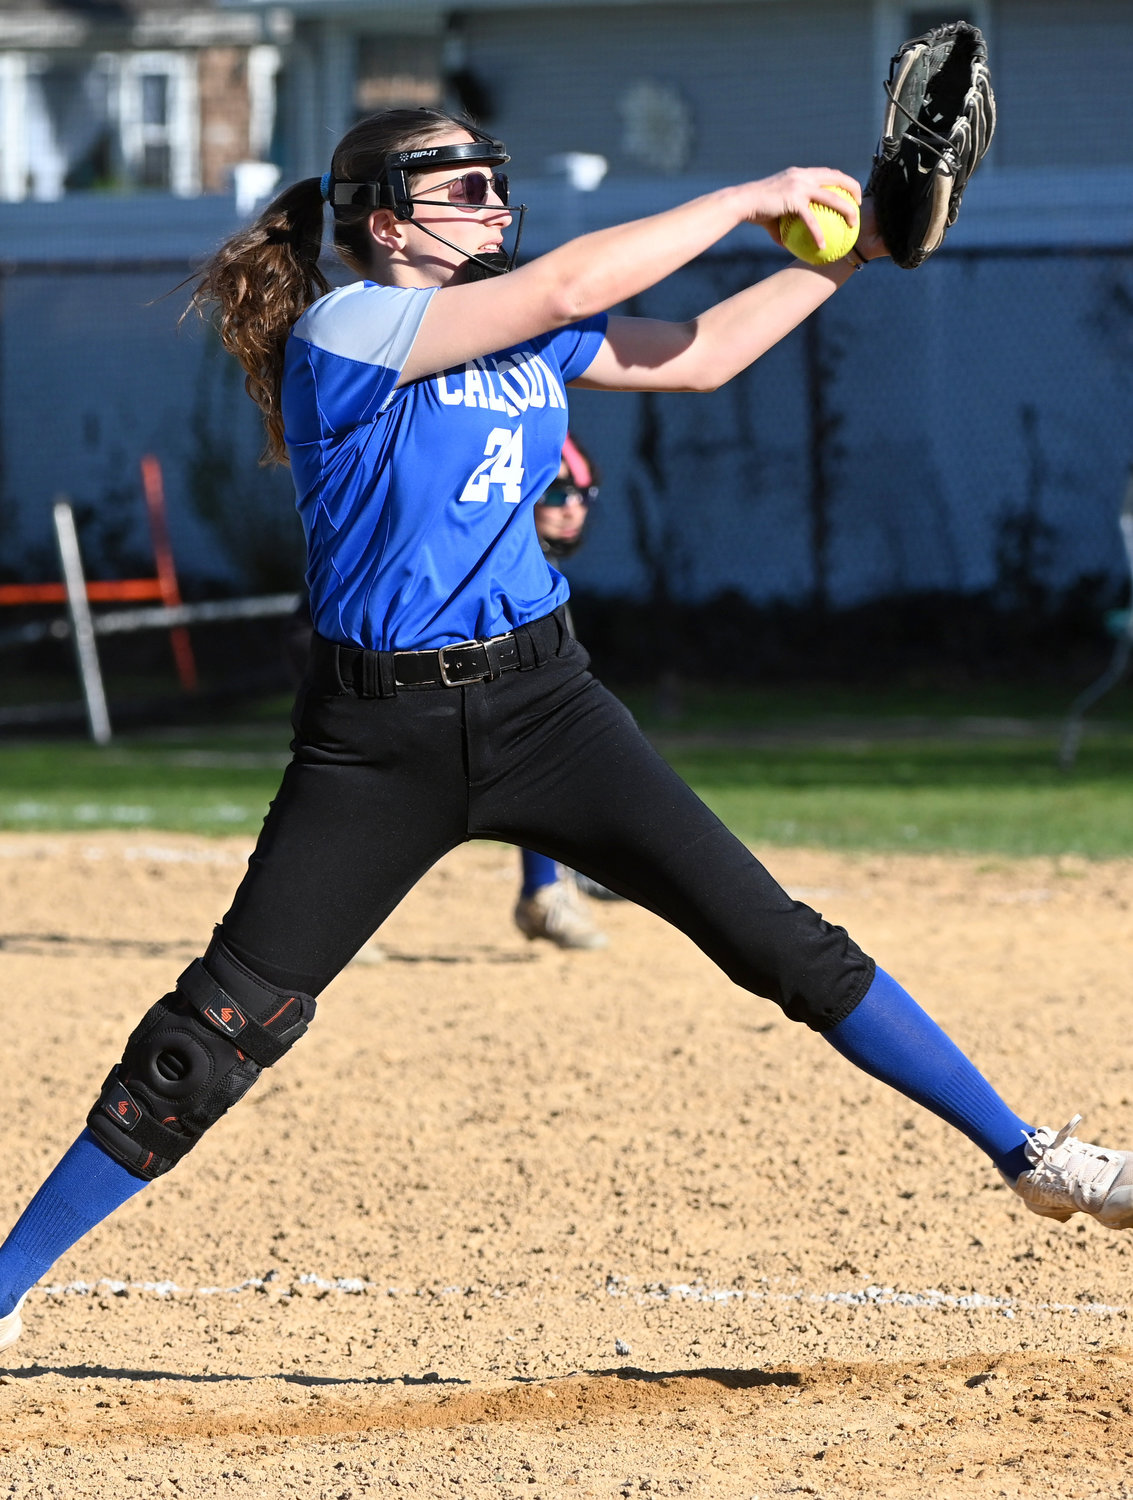 Senior Lauren DeMarco has been a fixture in the circle for the Colts and has 76 strikeouts in 52 innings with a 2.03 ERA.